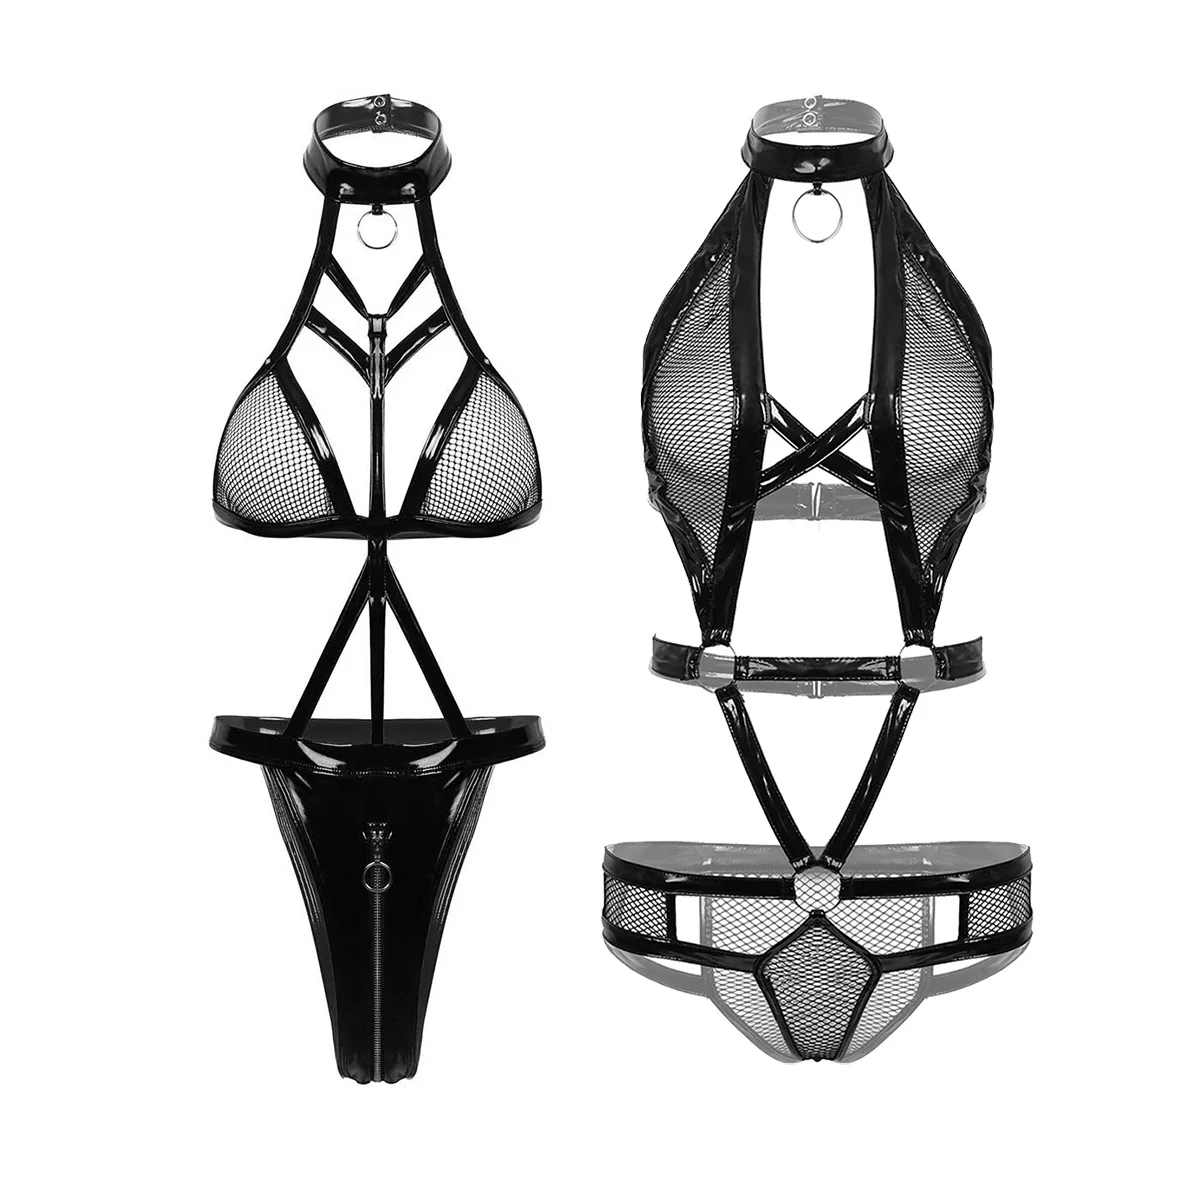 

Womens Hot Wet Look Exotic Teddies Leather Lingerie Nipples Cups Zippered Crotch High Cut Bodysuit Catsuit for Clubwear Costumes